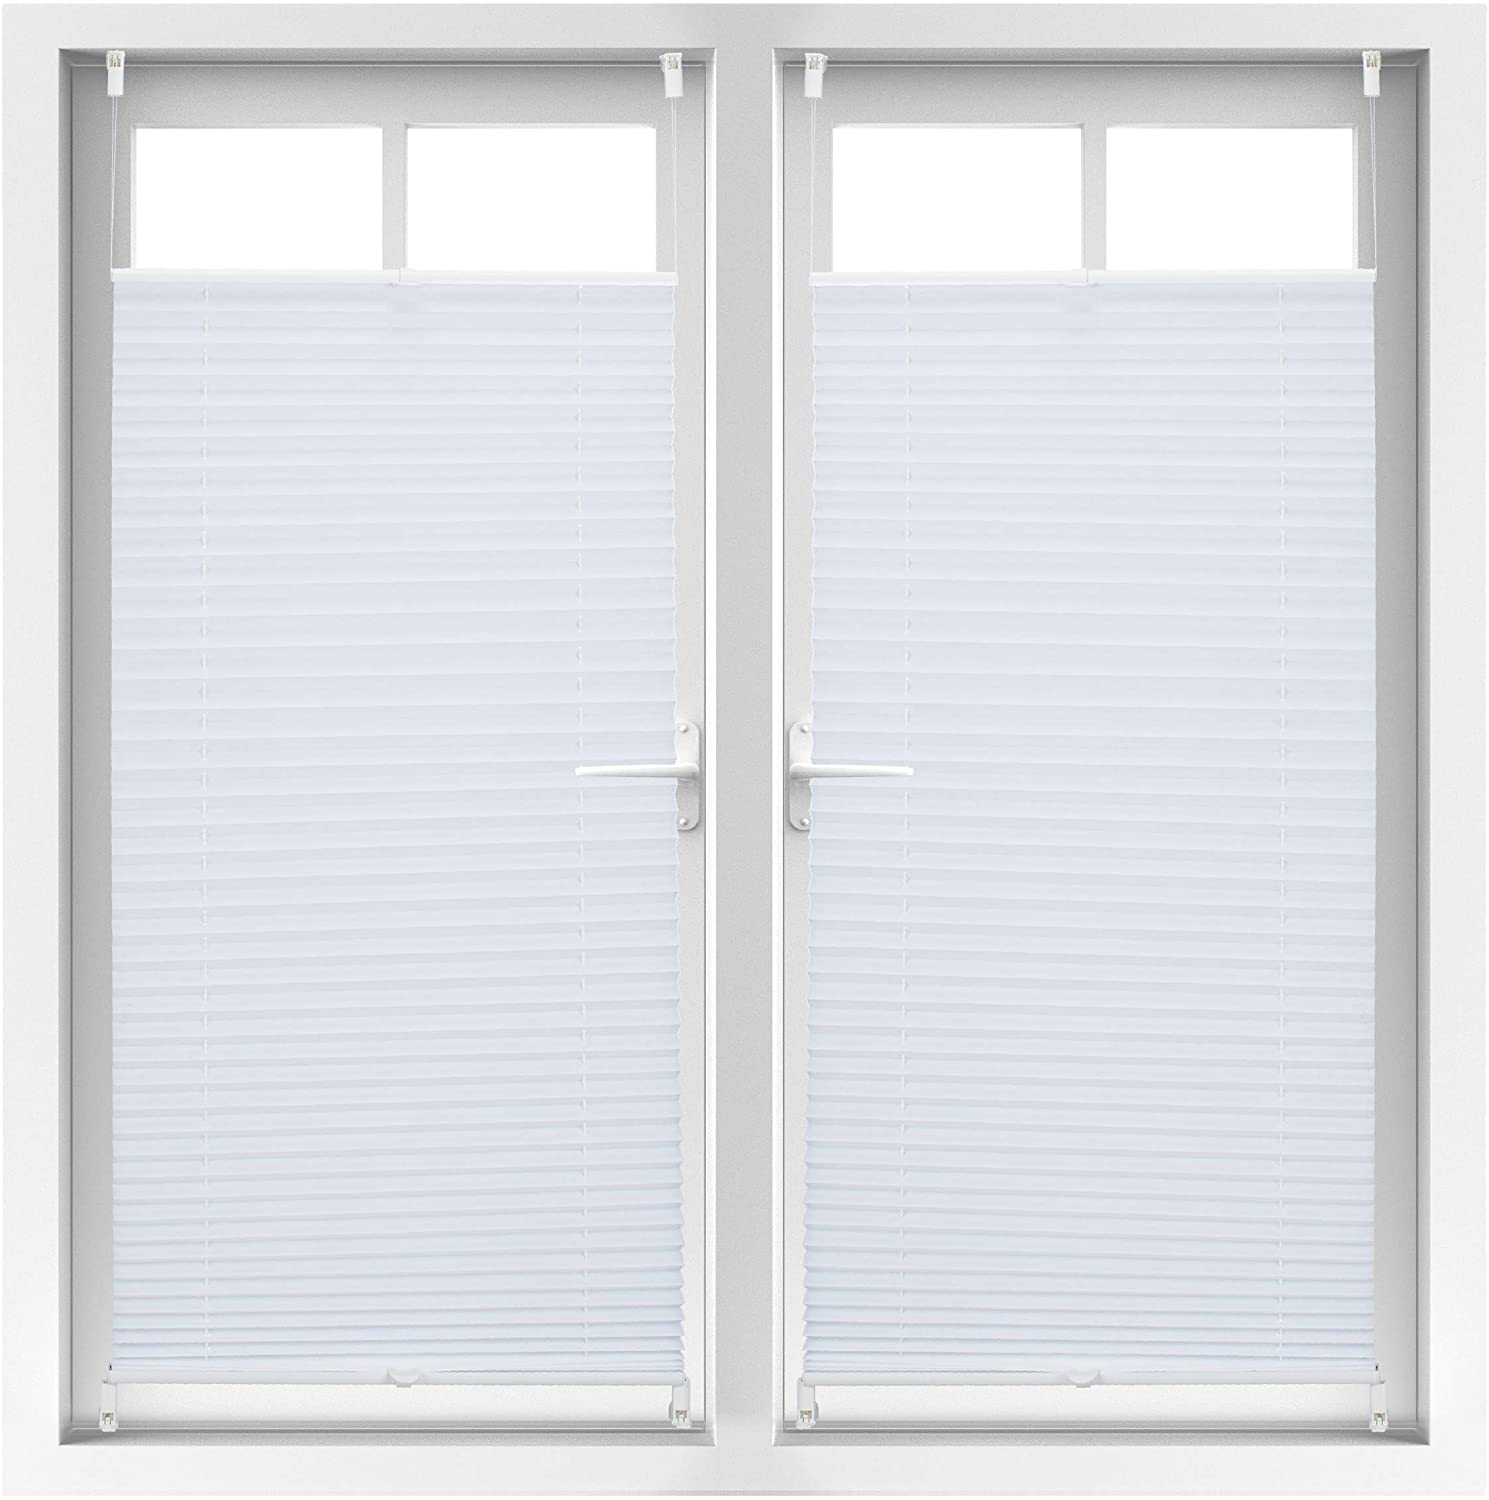 2X Pleated Blind Klemmfix Without Drilling, For Gluing Folding Blind Blind 